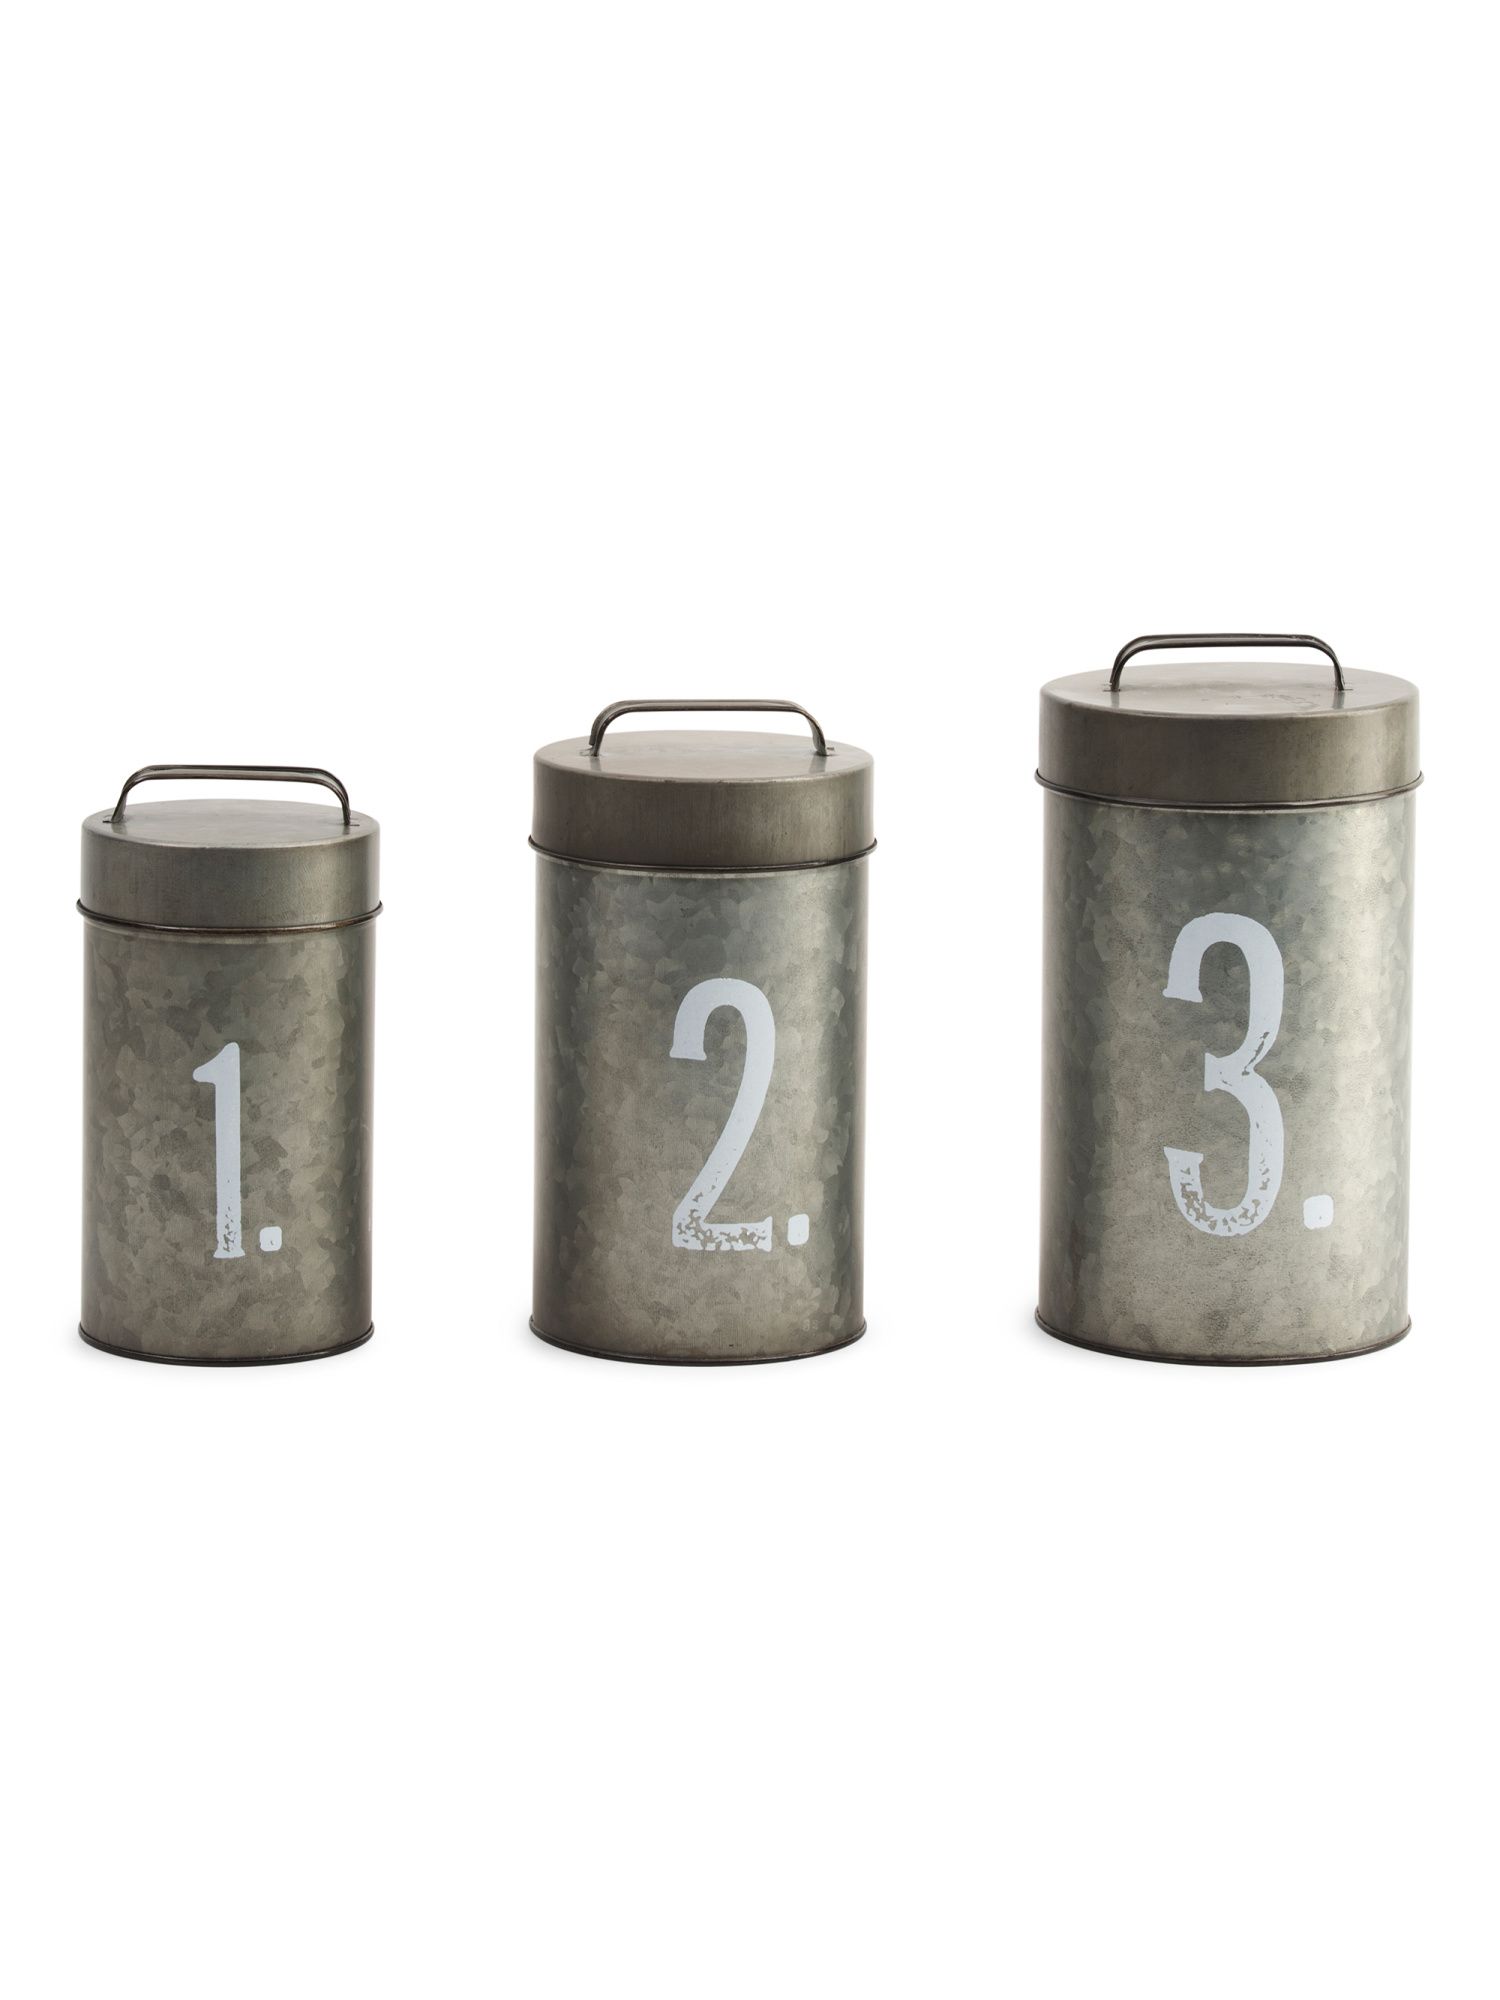 Set Of 3 Galvanized Canisters | TJ Maxx